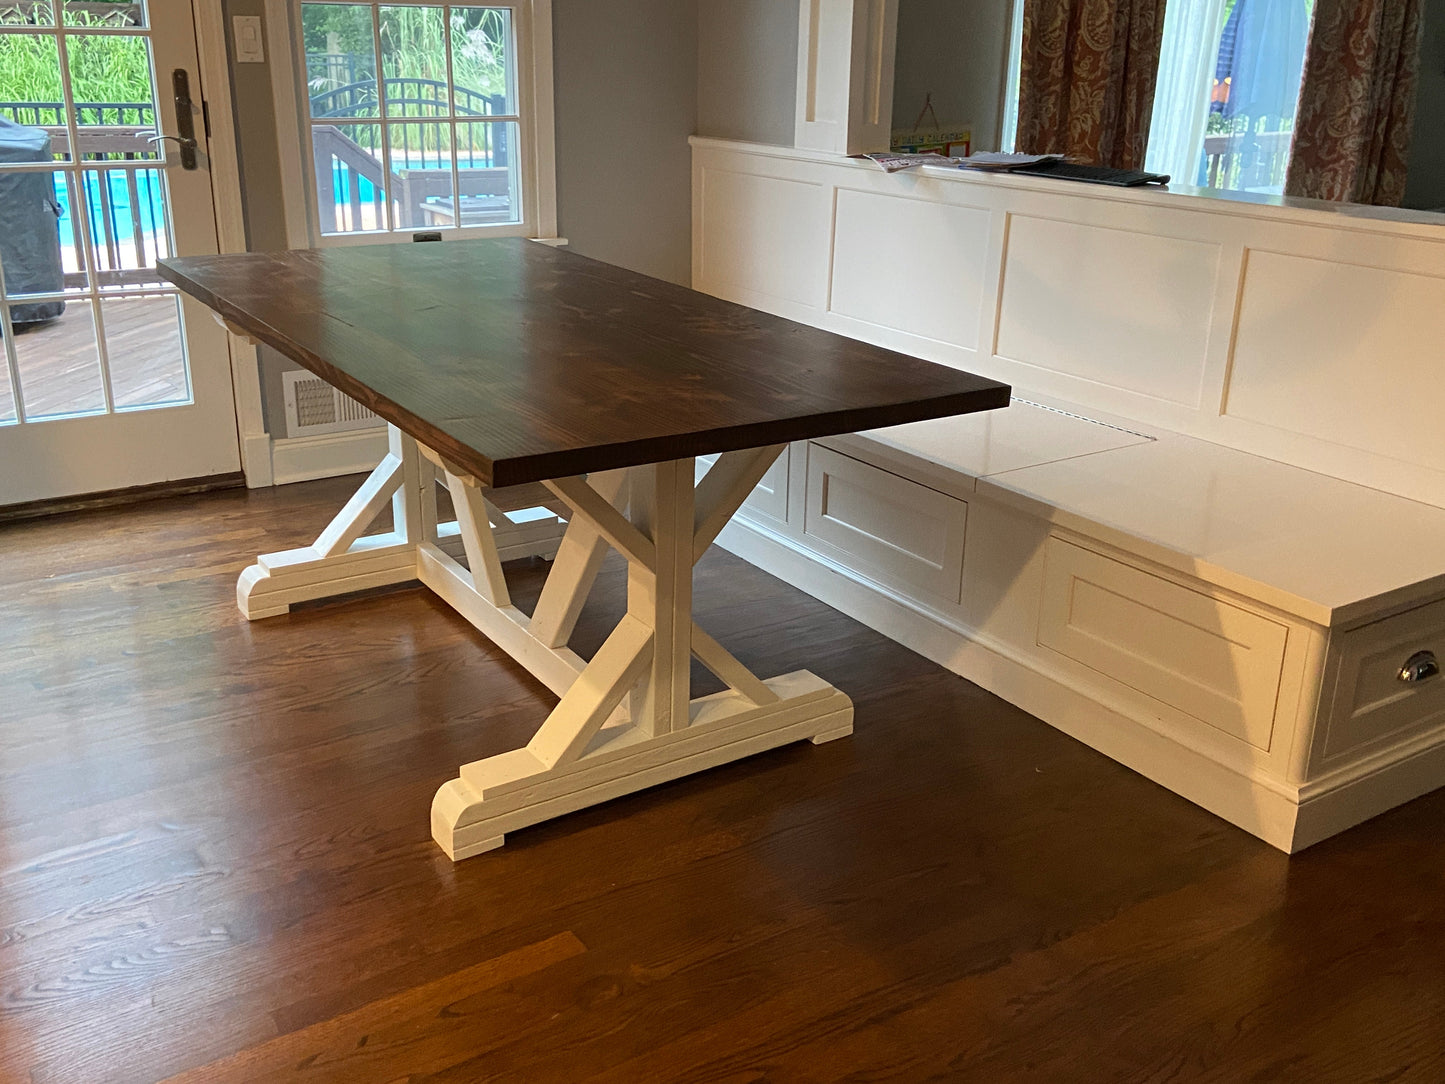 Farmhouse X base table with banquette seating